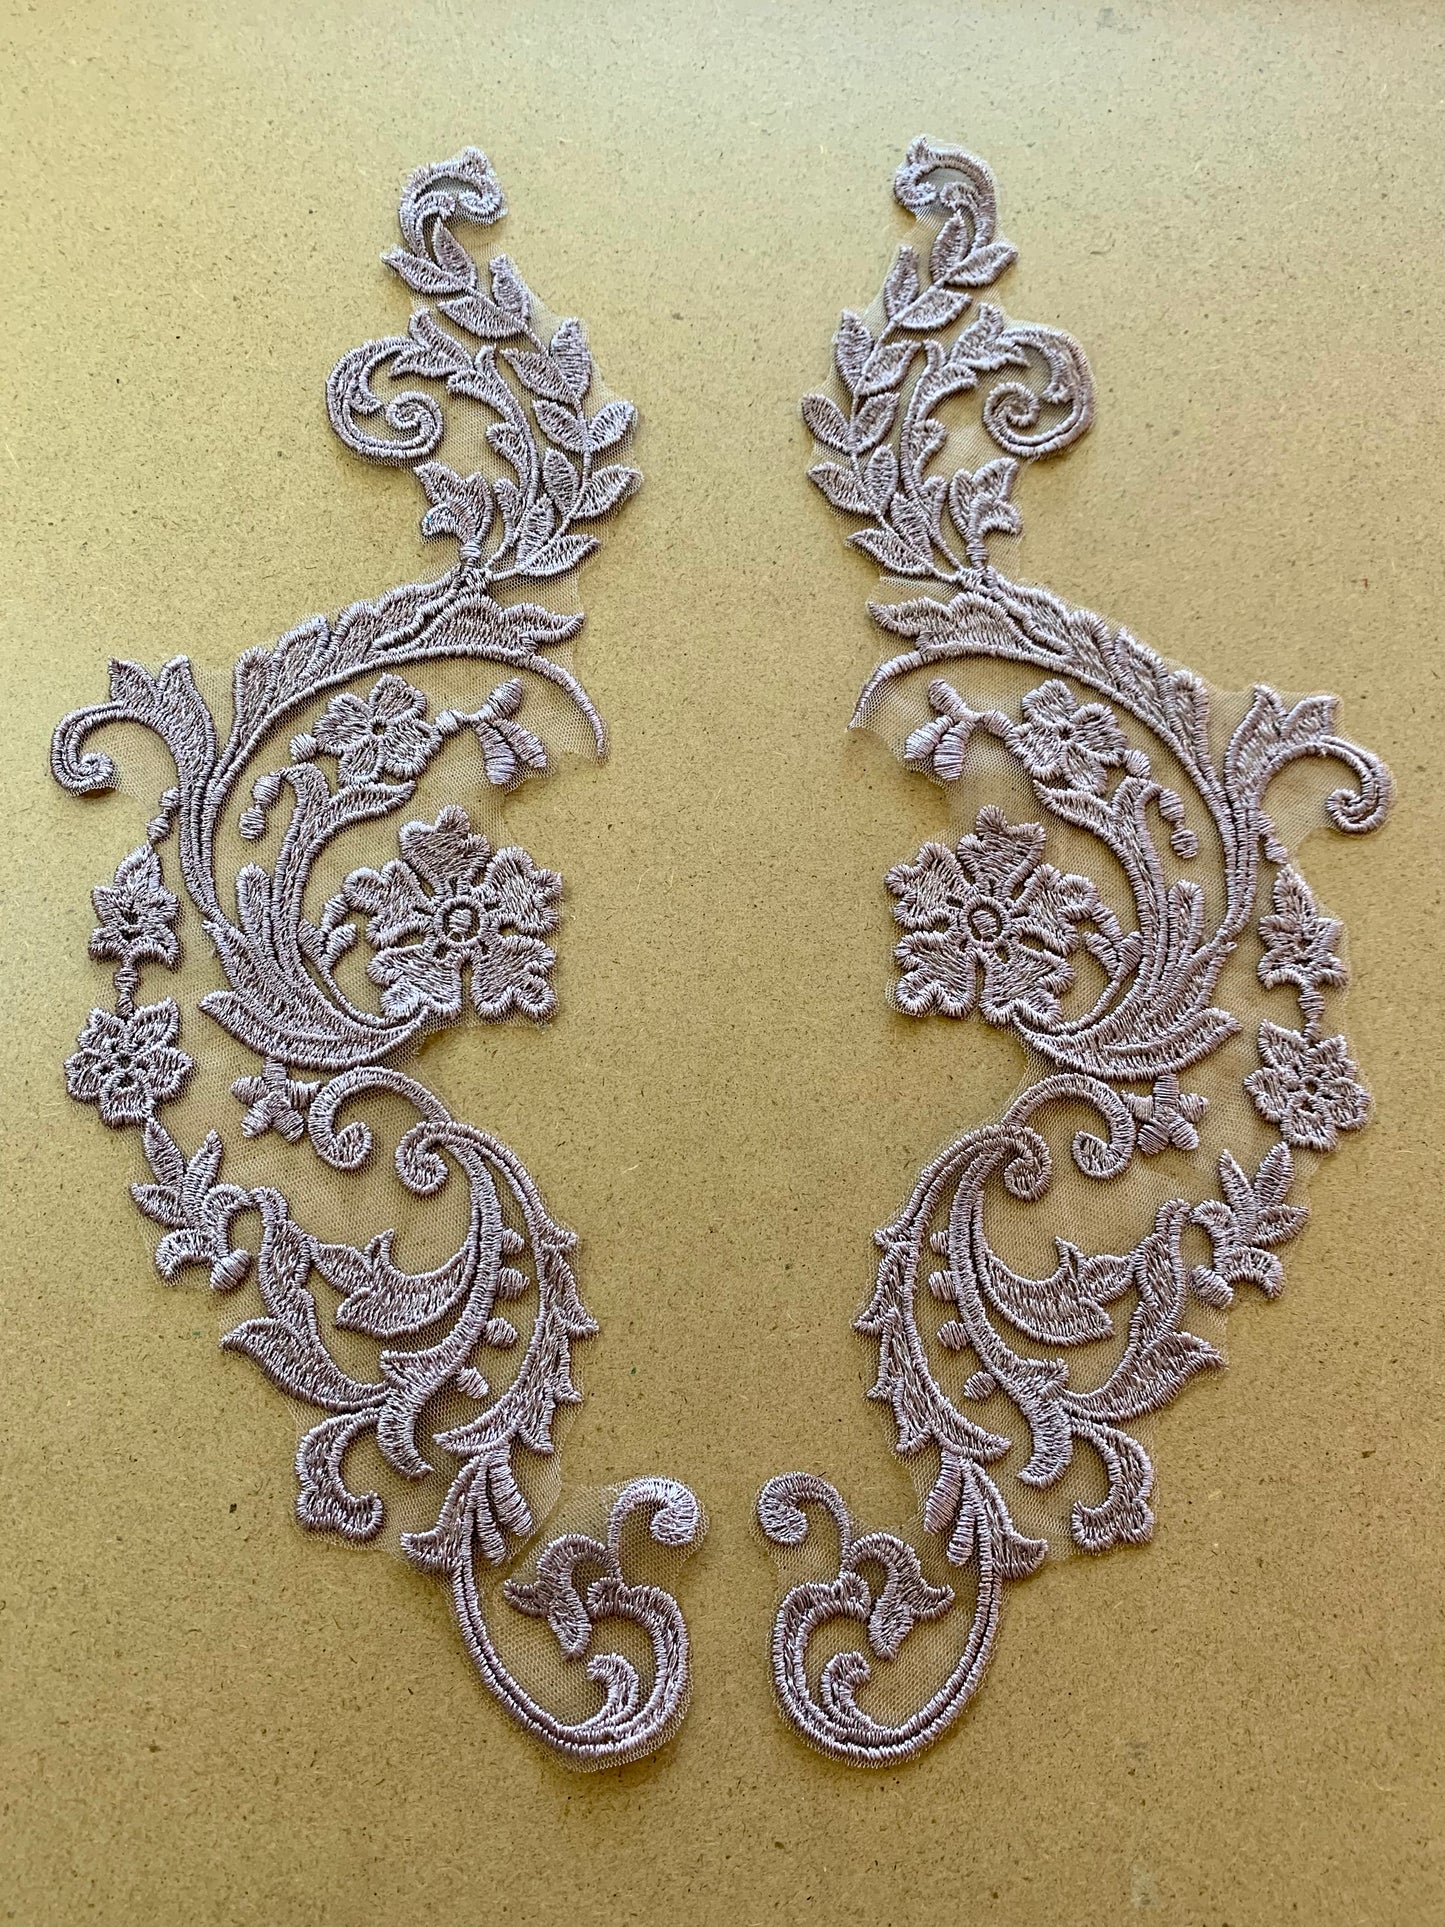 Embroidered Mirror Image Lace Applique #2 - 11 Colours